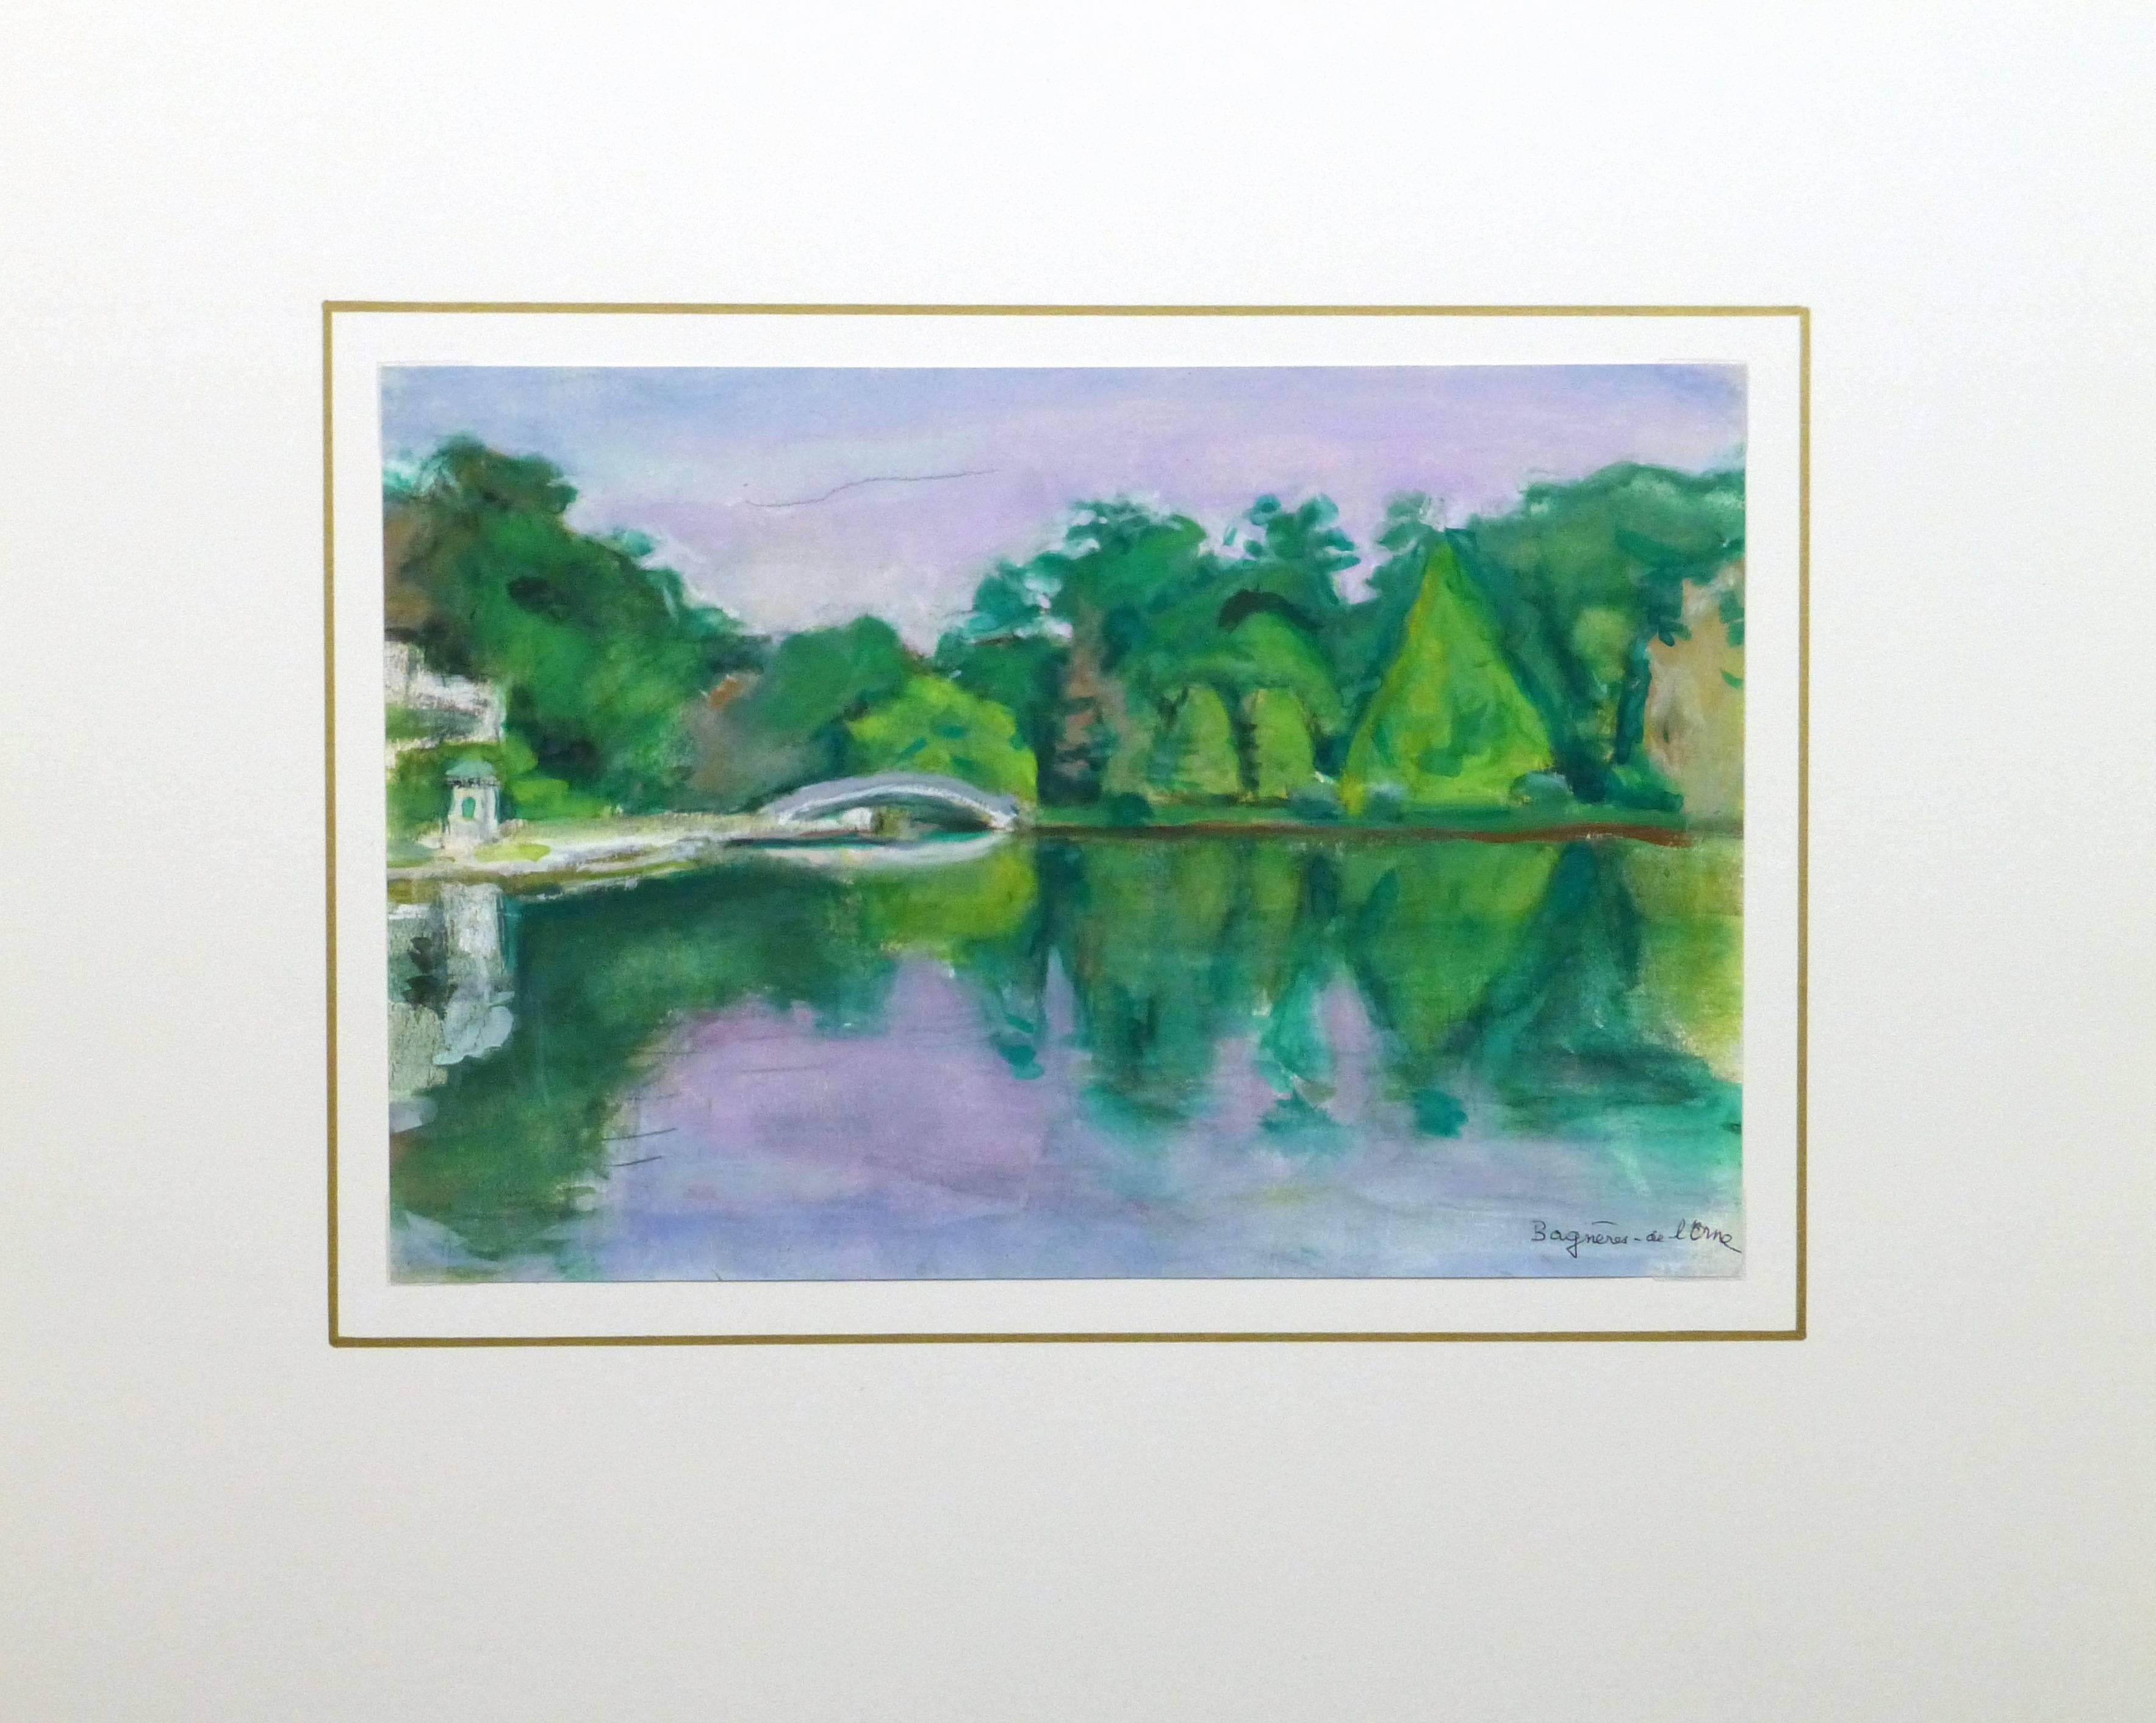 This richly-hued acrylic landscape painting depicts lush, emerald green trees surrounding the River Orne in Normandy, France, by French artist Madeleine Scali (1911-2000), c. 1970. Using tones of green, blue, and lavender, Scali beautifully captures